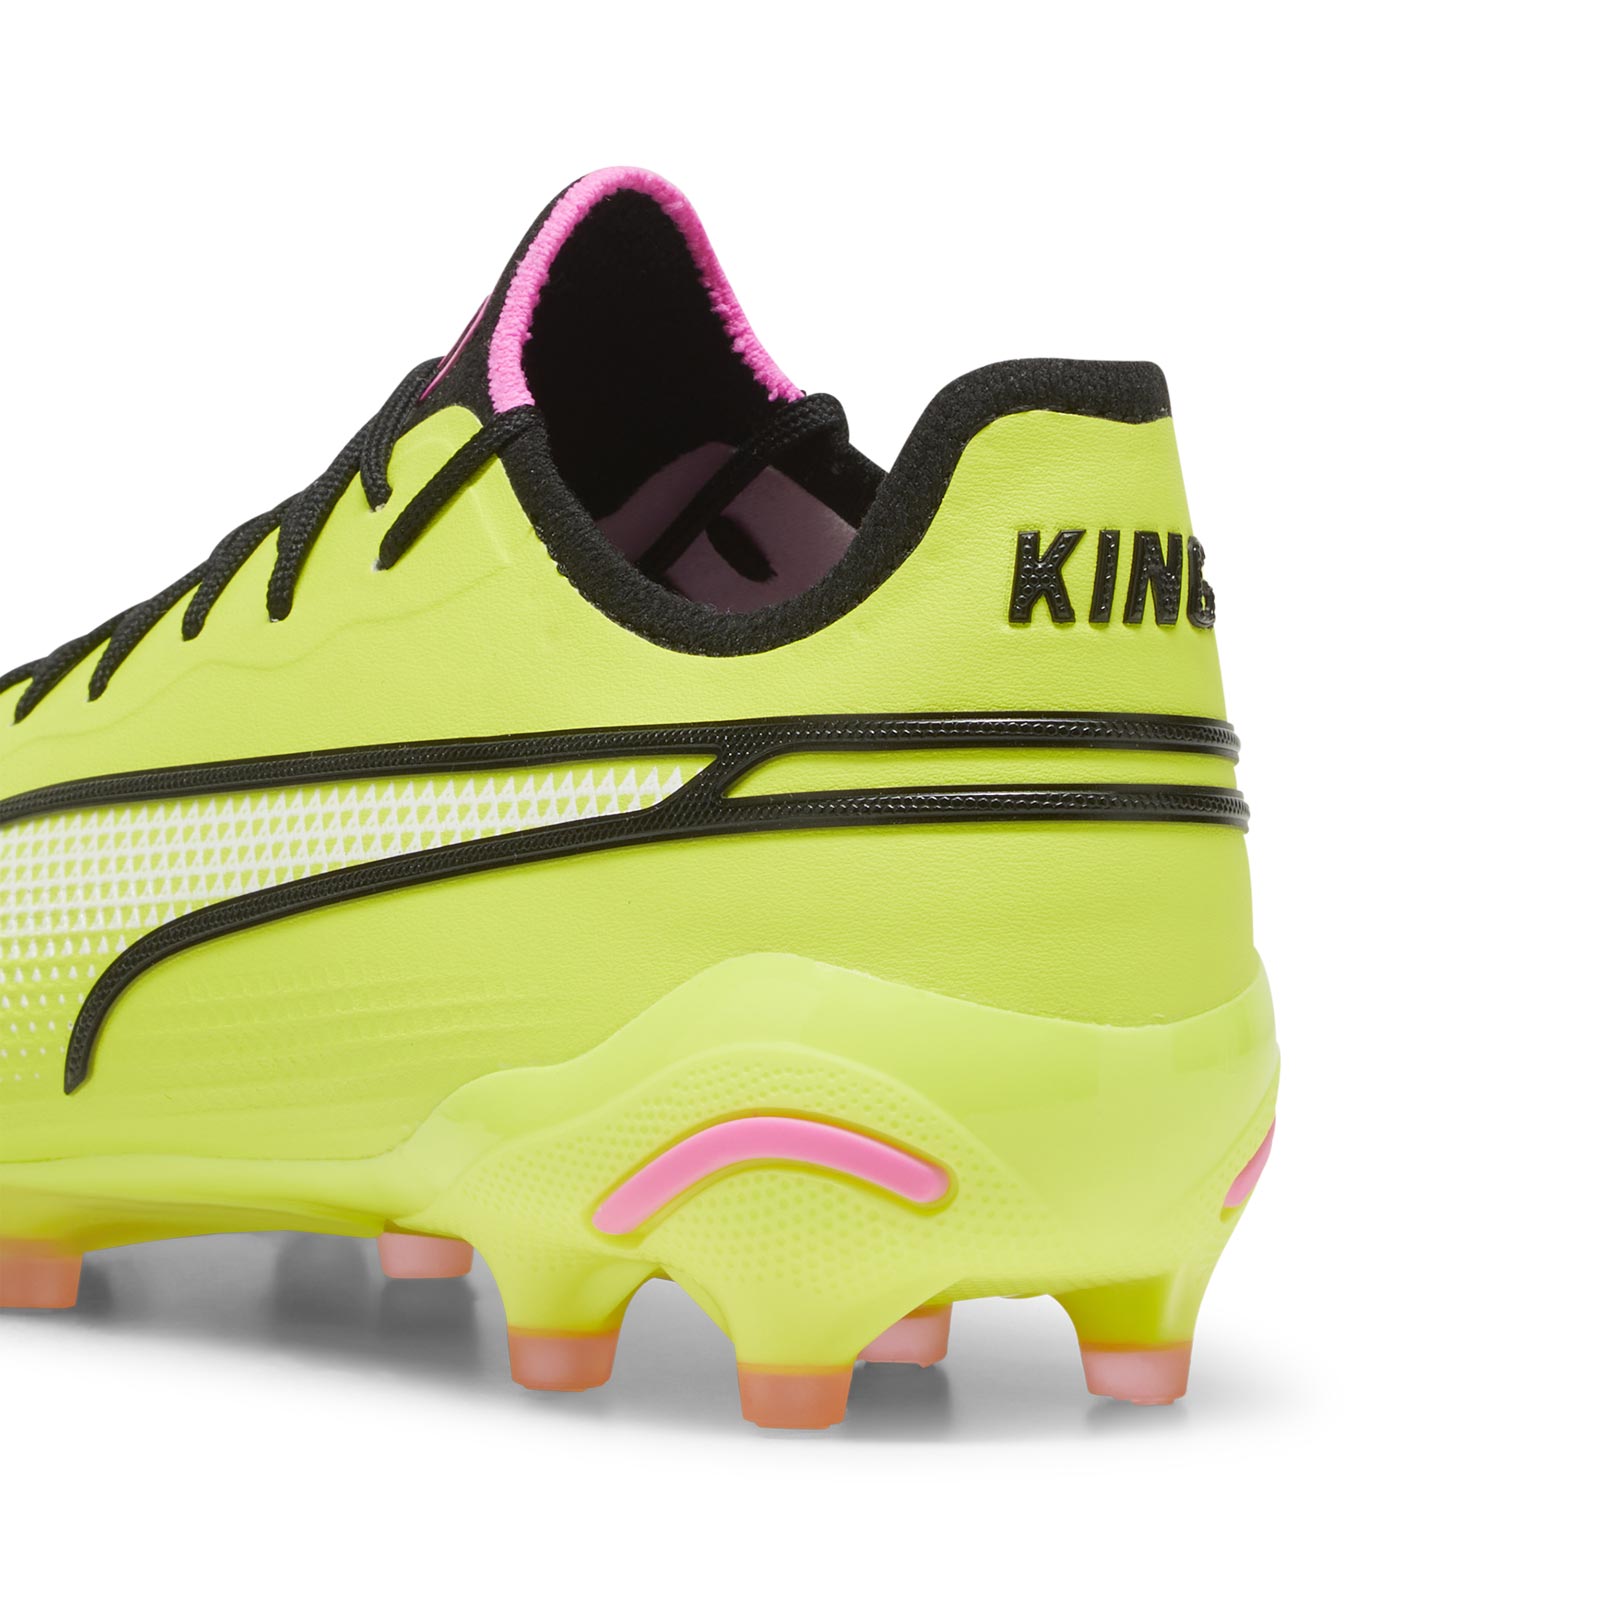 PUMA KING ULTIMATE FIRM-GROUND FOOTBALL BOOTS